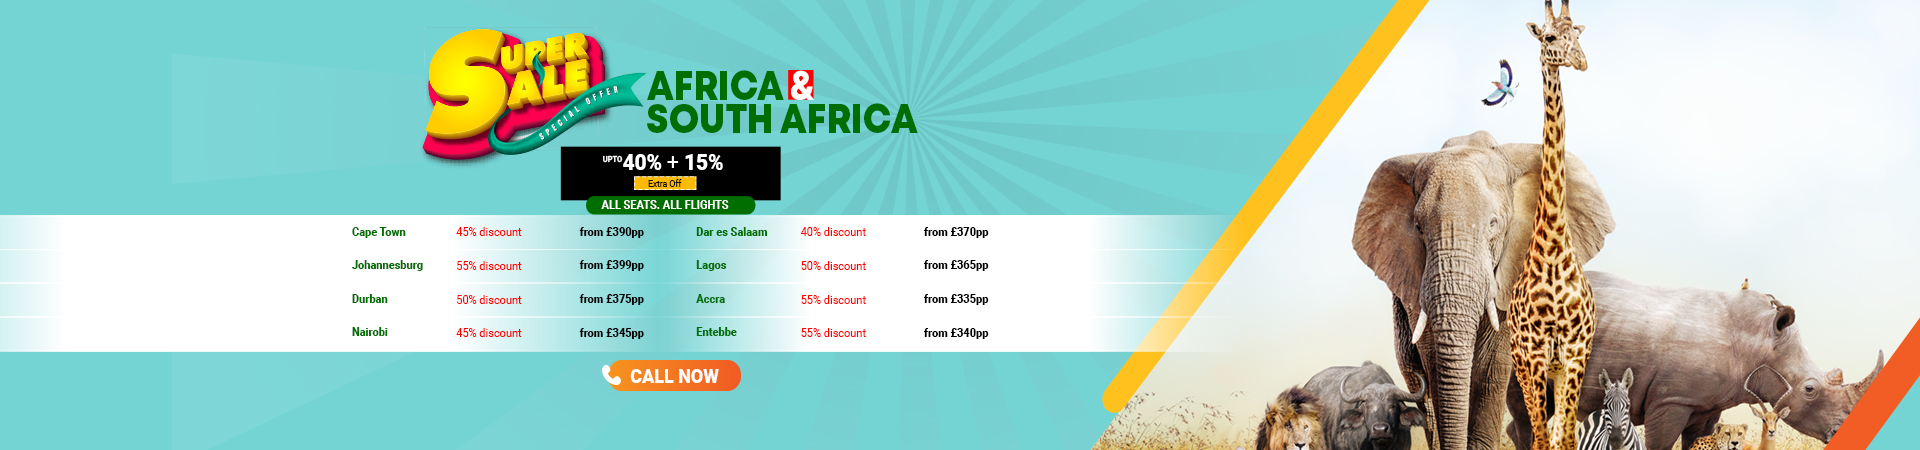 Africa and South Africa Flight Sale